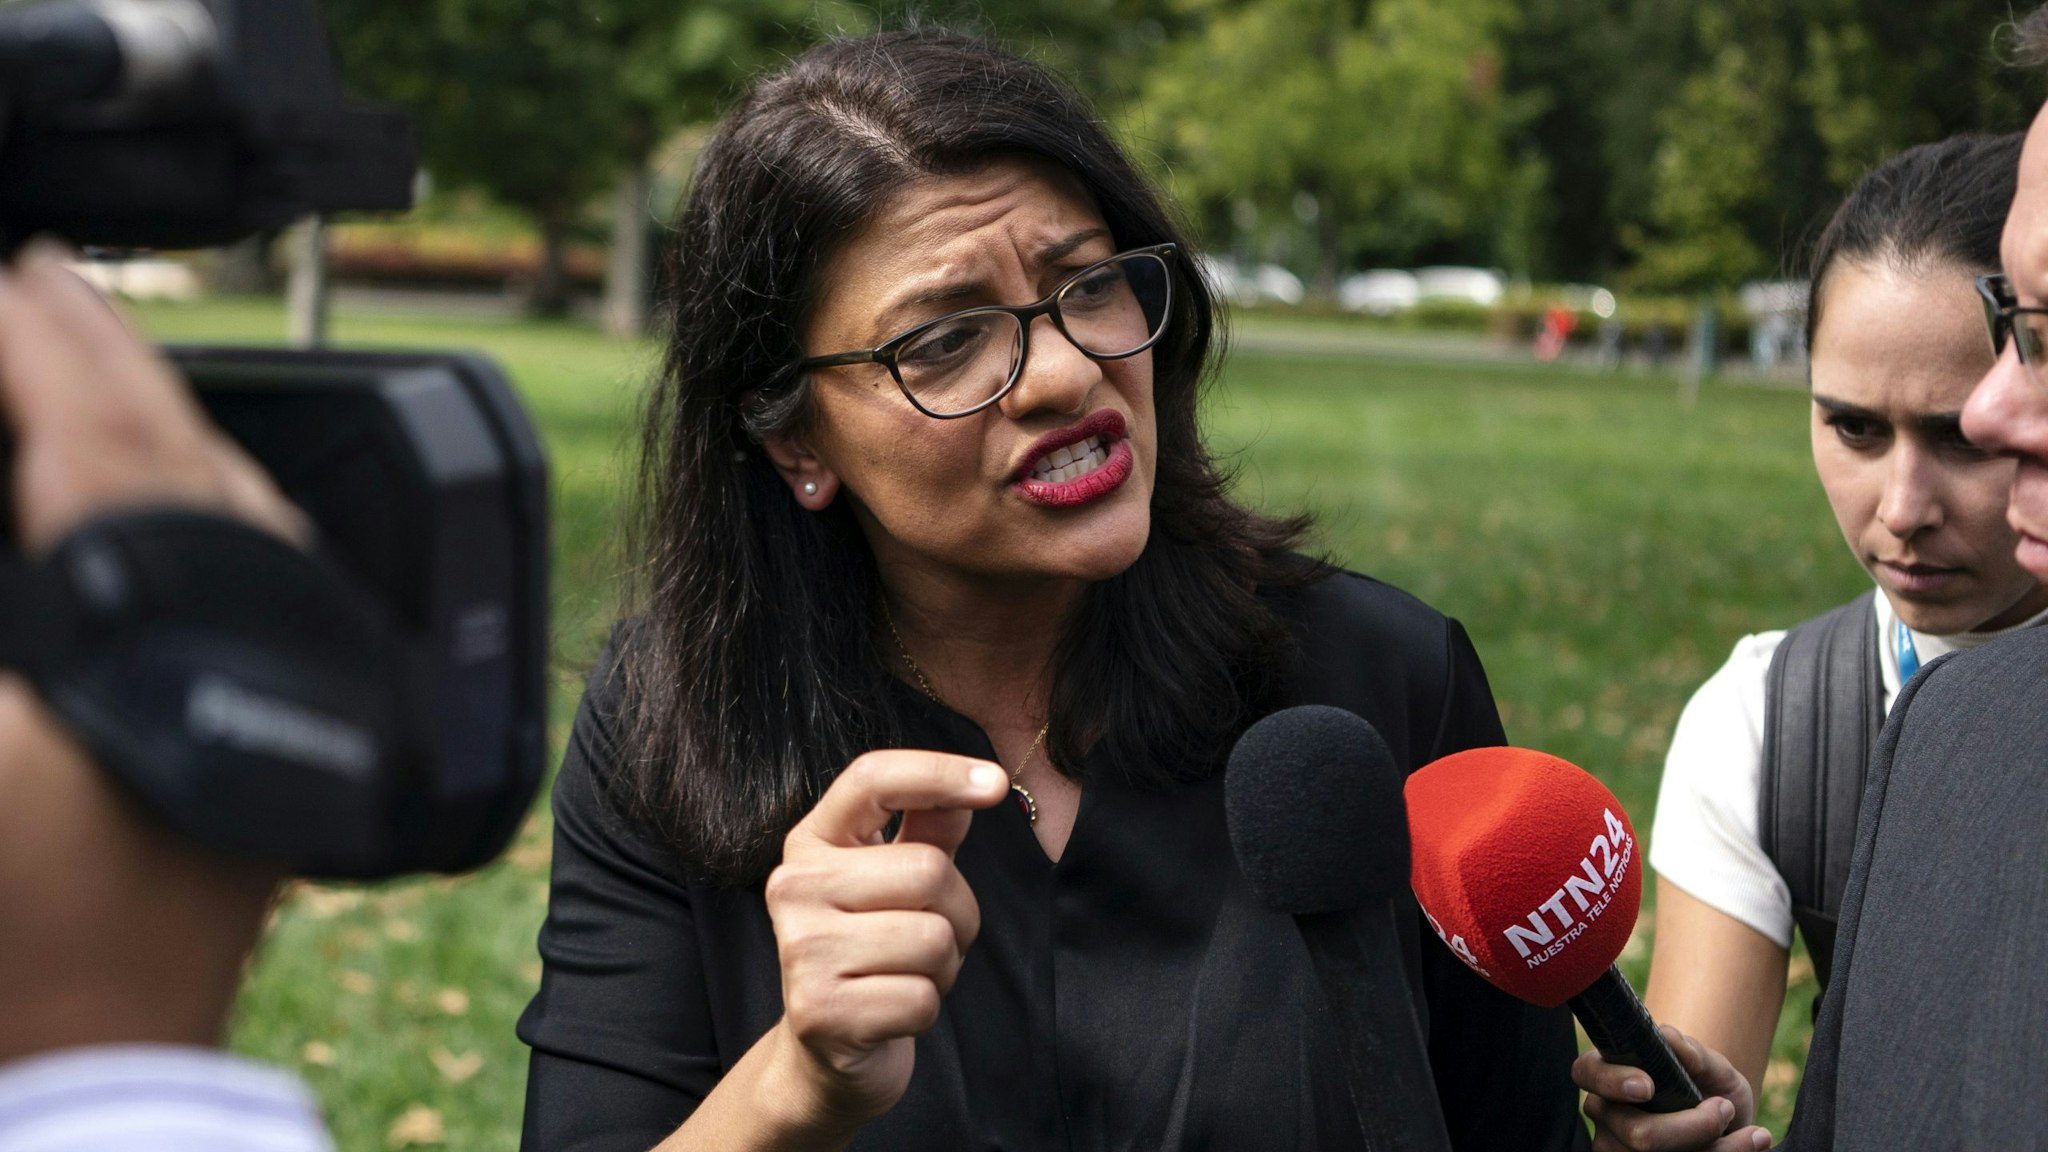 Representative Rashida Tlaib, a Democrat from Michigan, speaks with members of the media following a rally held in support of impeaching U.S. President Donald Trump in Washington, D.C., U.S., on Thursday, Sept. 26, 2019. House Speaker Nancy Pelosi announced that the House would begin an impeachment inquiry against Trump related to a whistle-blower complaint alleging troubling interactions between Trump and the president of Ukraine.